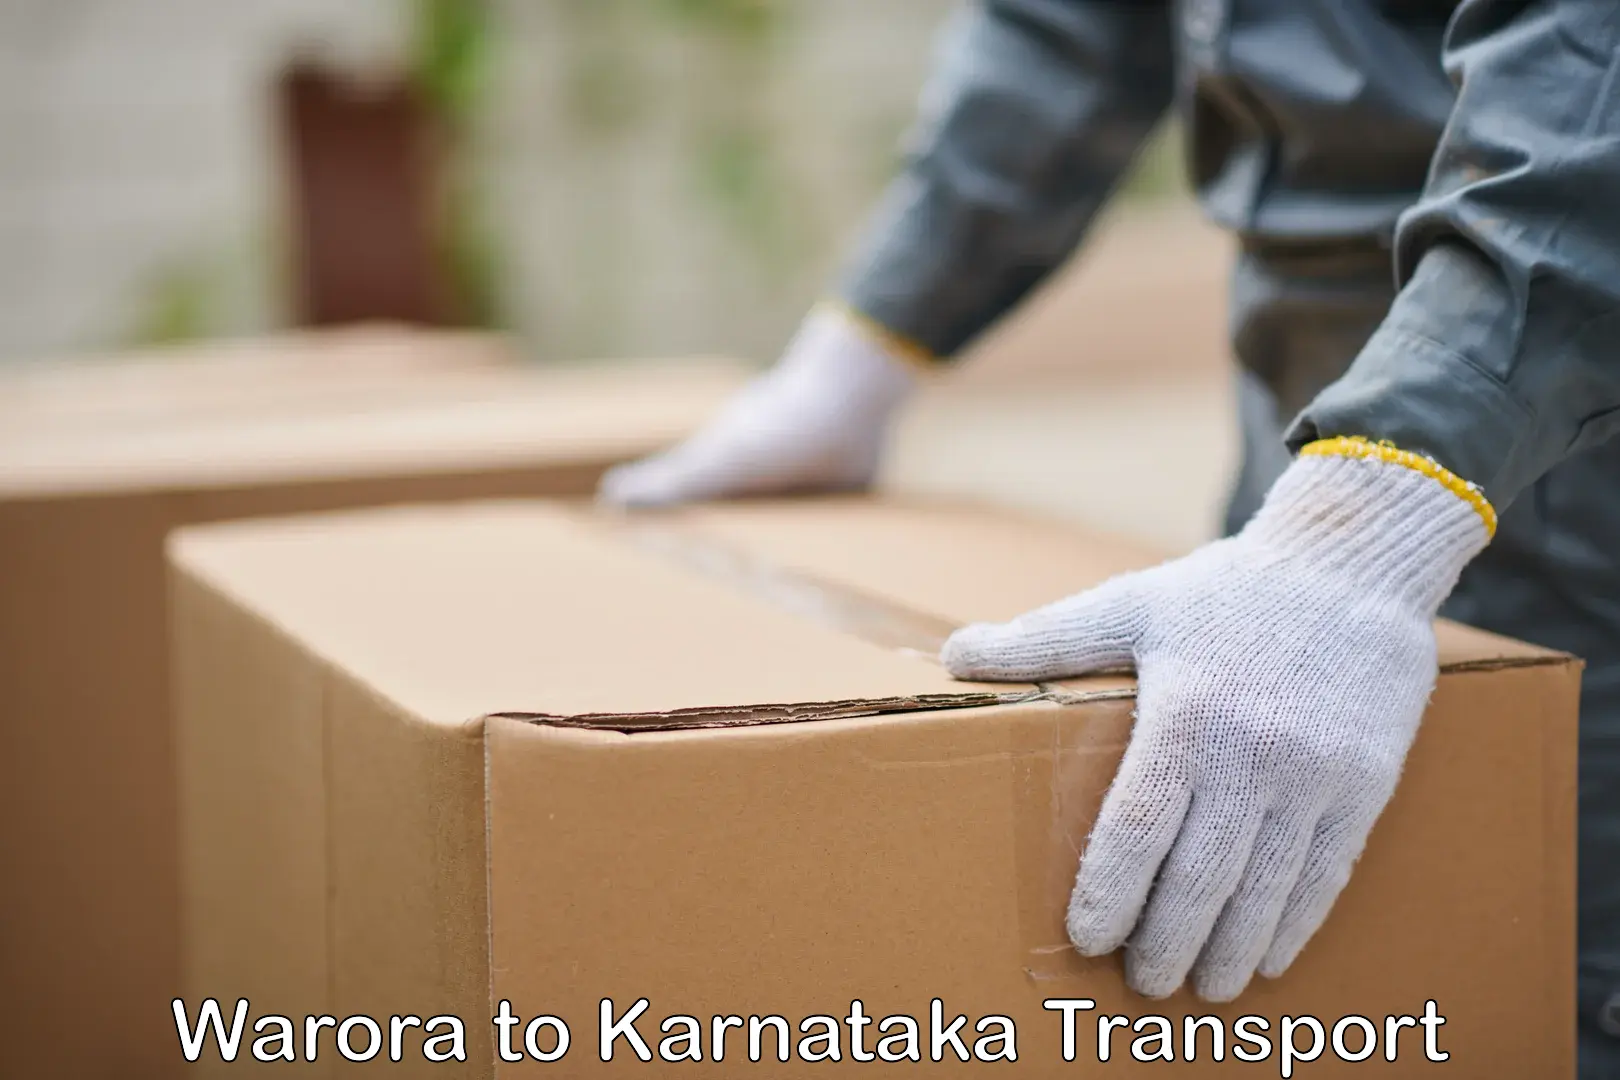 Commercial transport service Warora to Mangalore